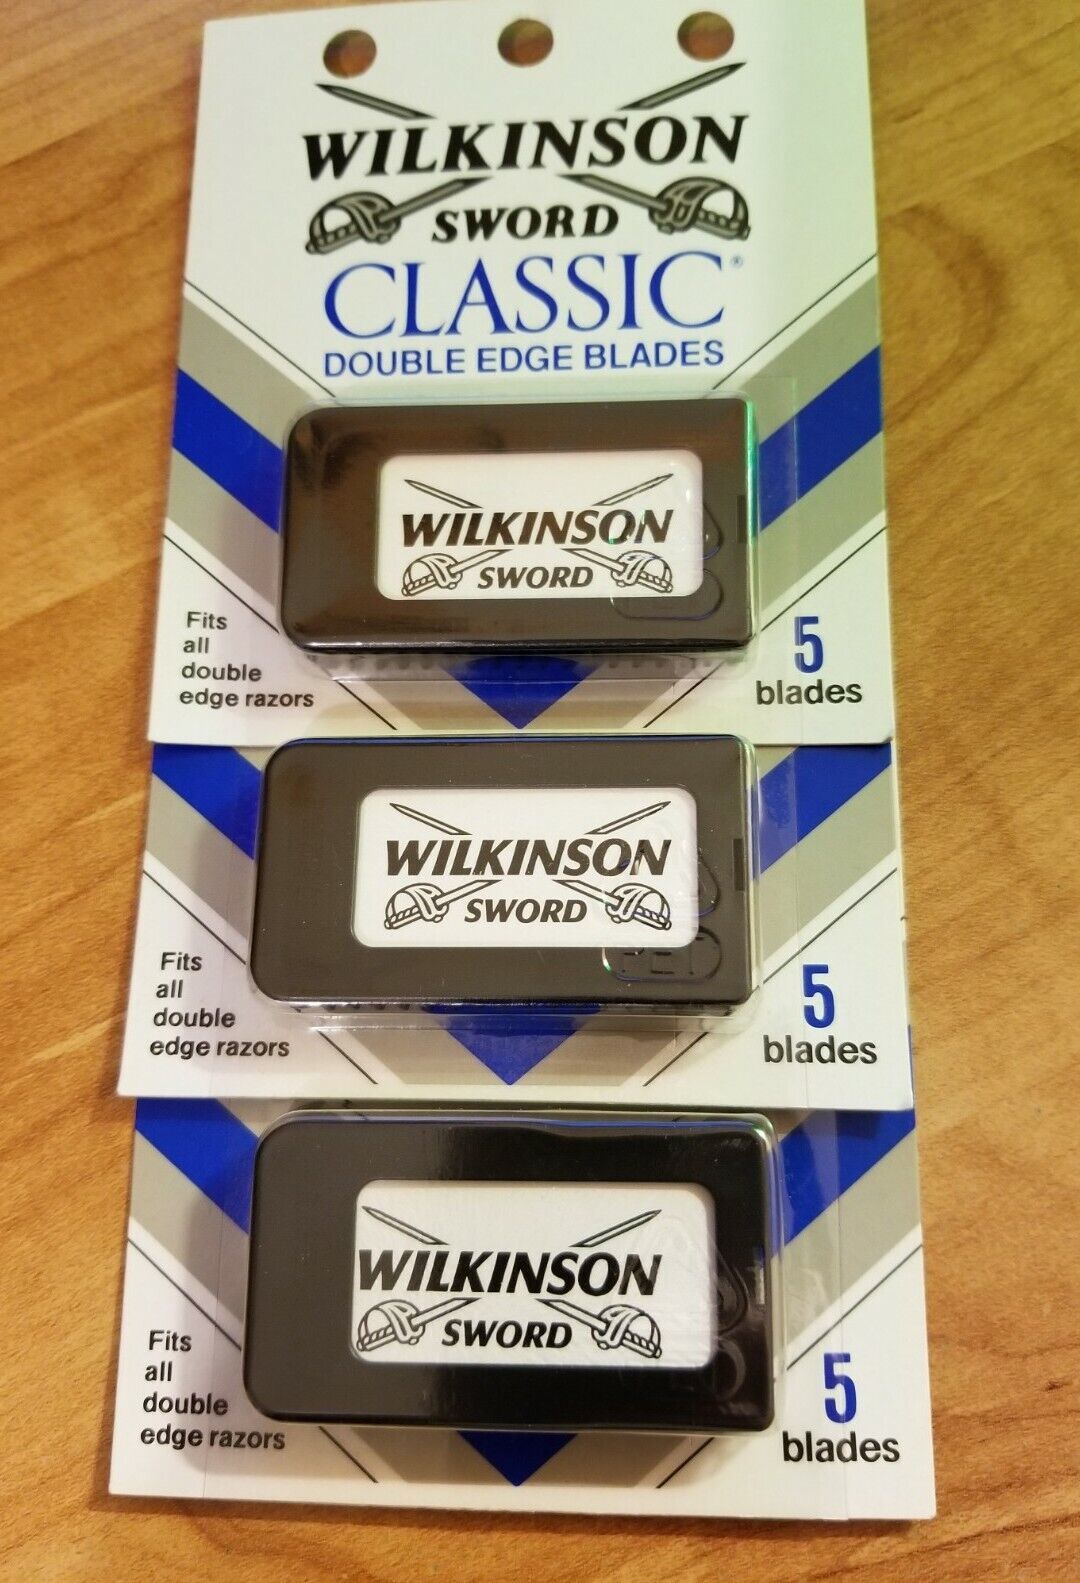 Wilkinson Sword Classic Double Edge Blades 5 ct. (Pack of 3) - $9.28